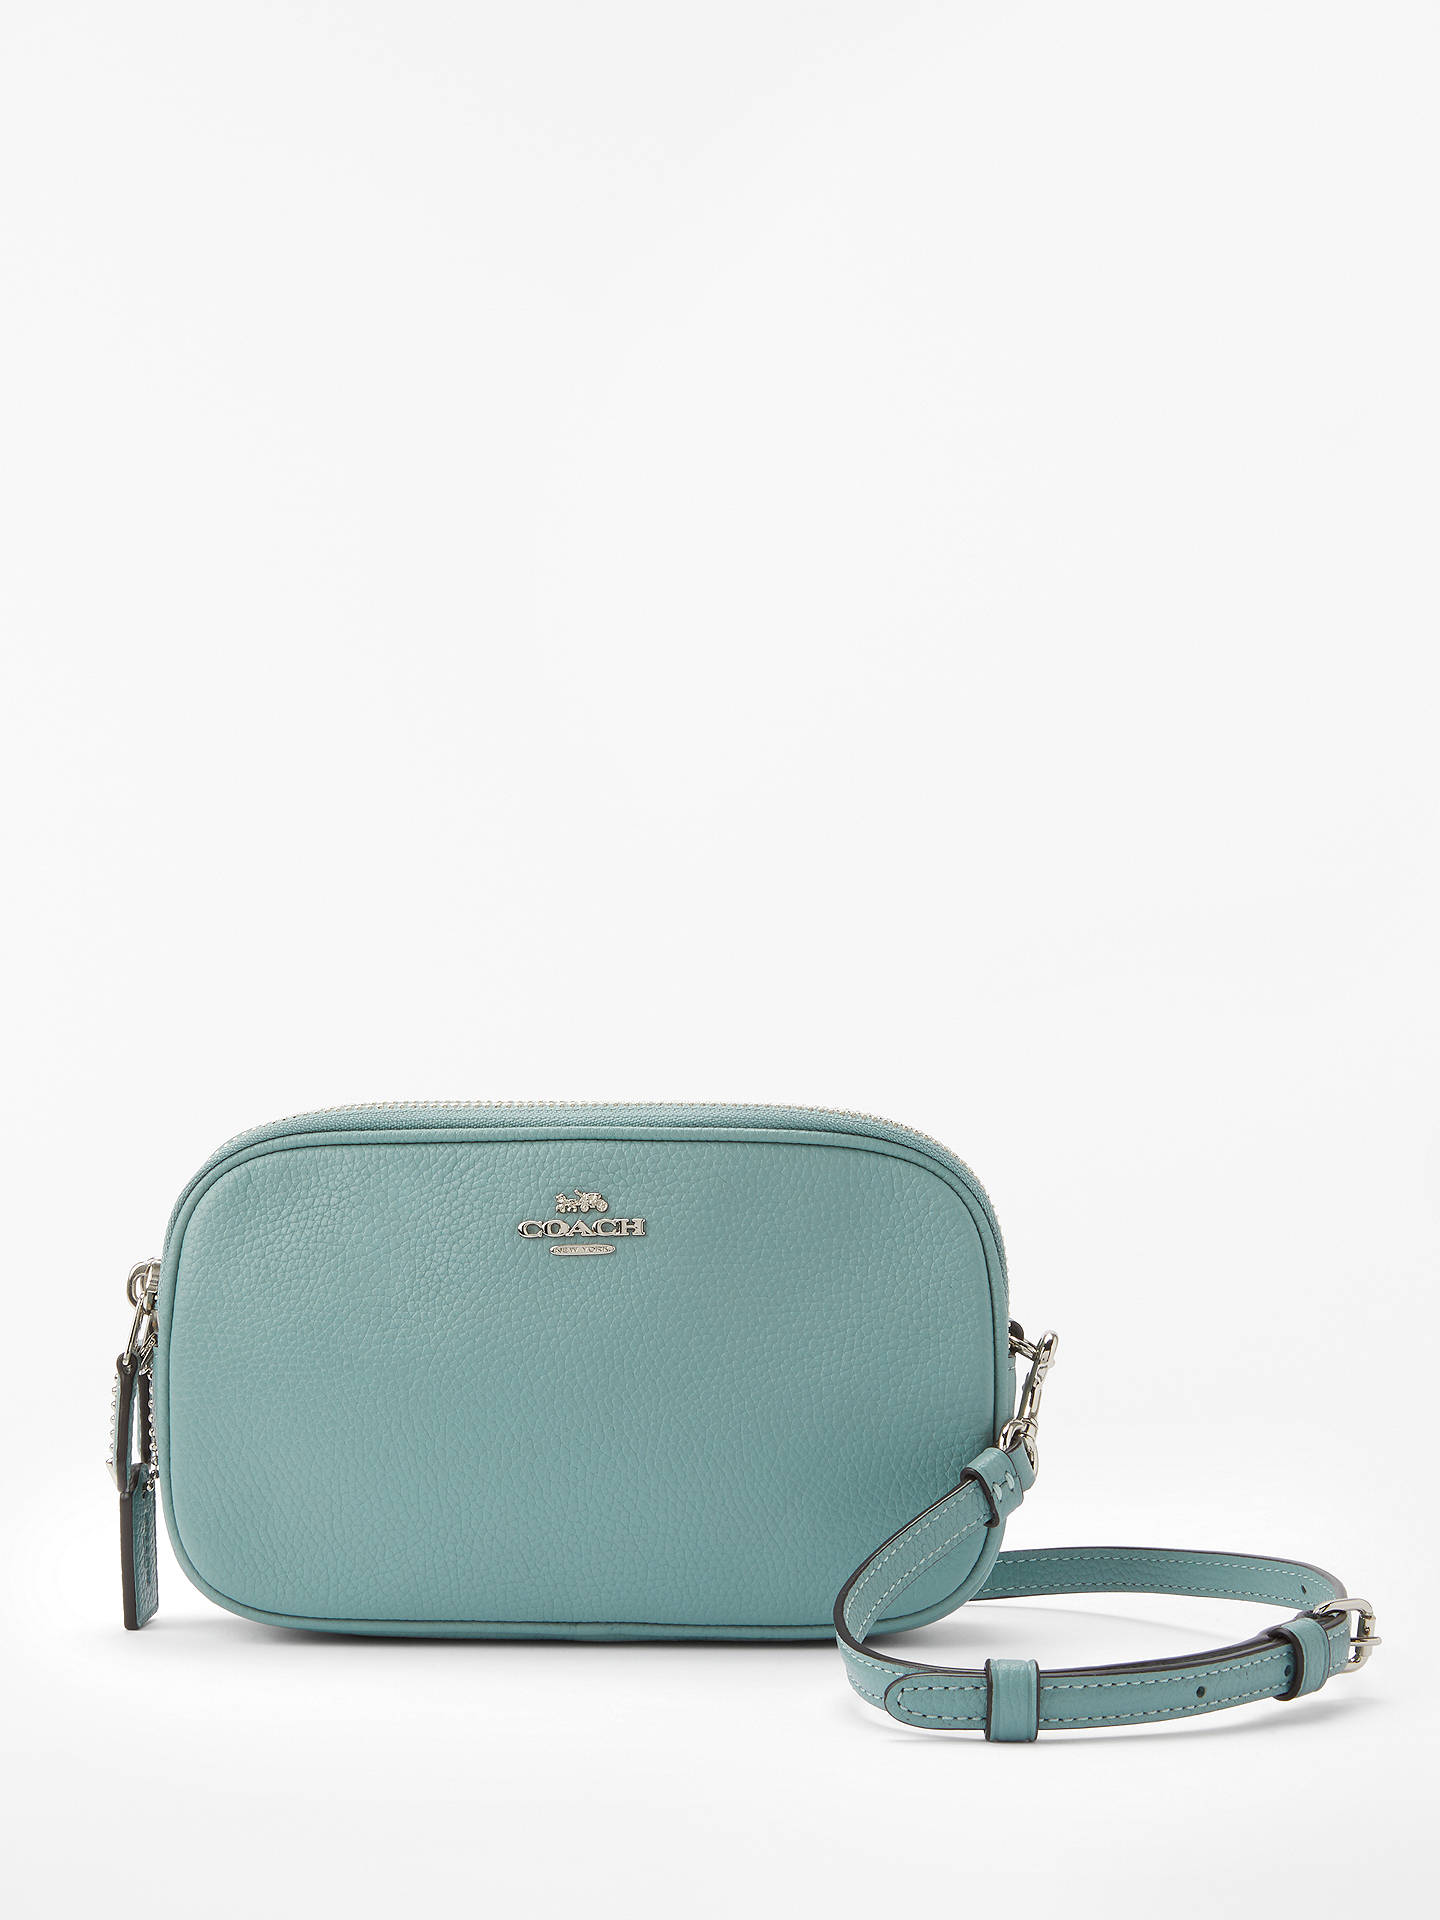 Coach Pebble Leather Cross Body Clutch Bag, Sage at John Lewis & Partners